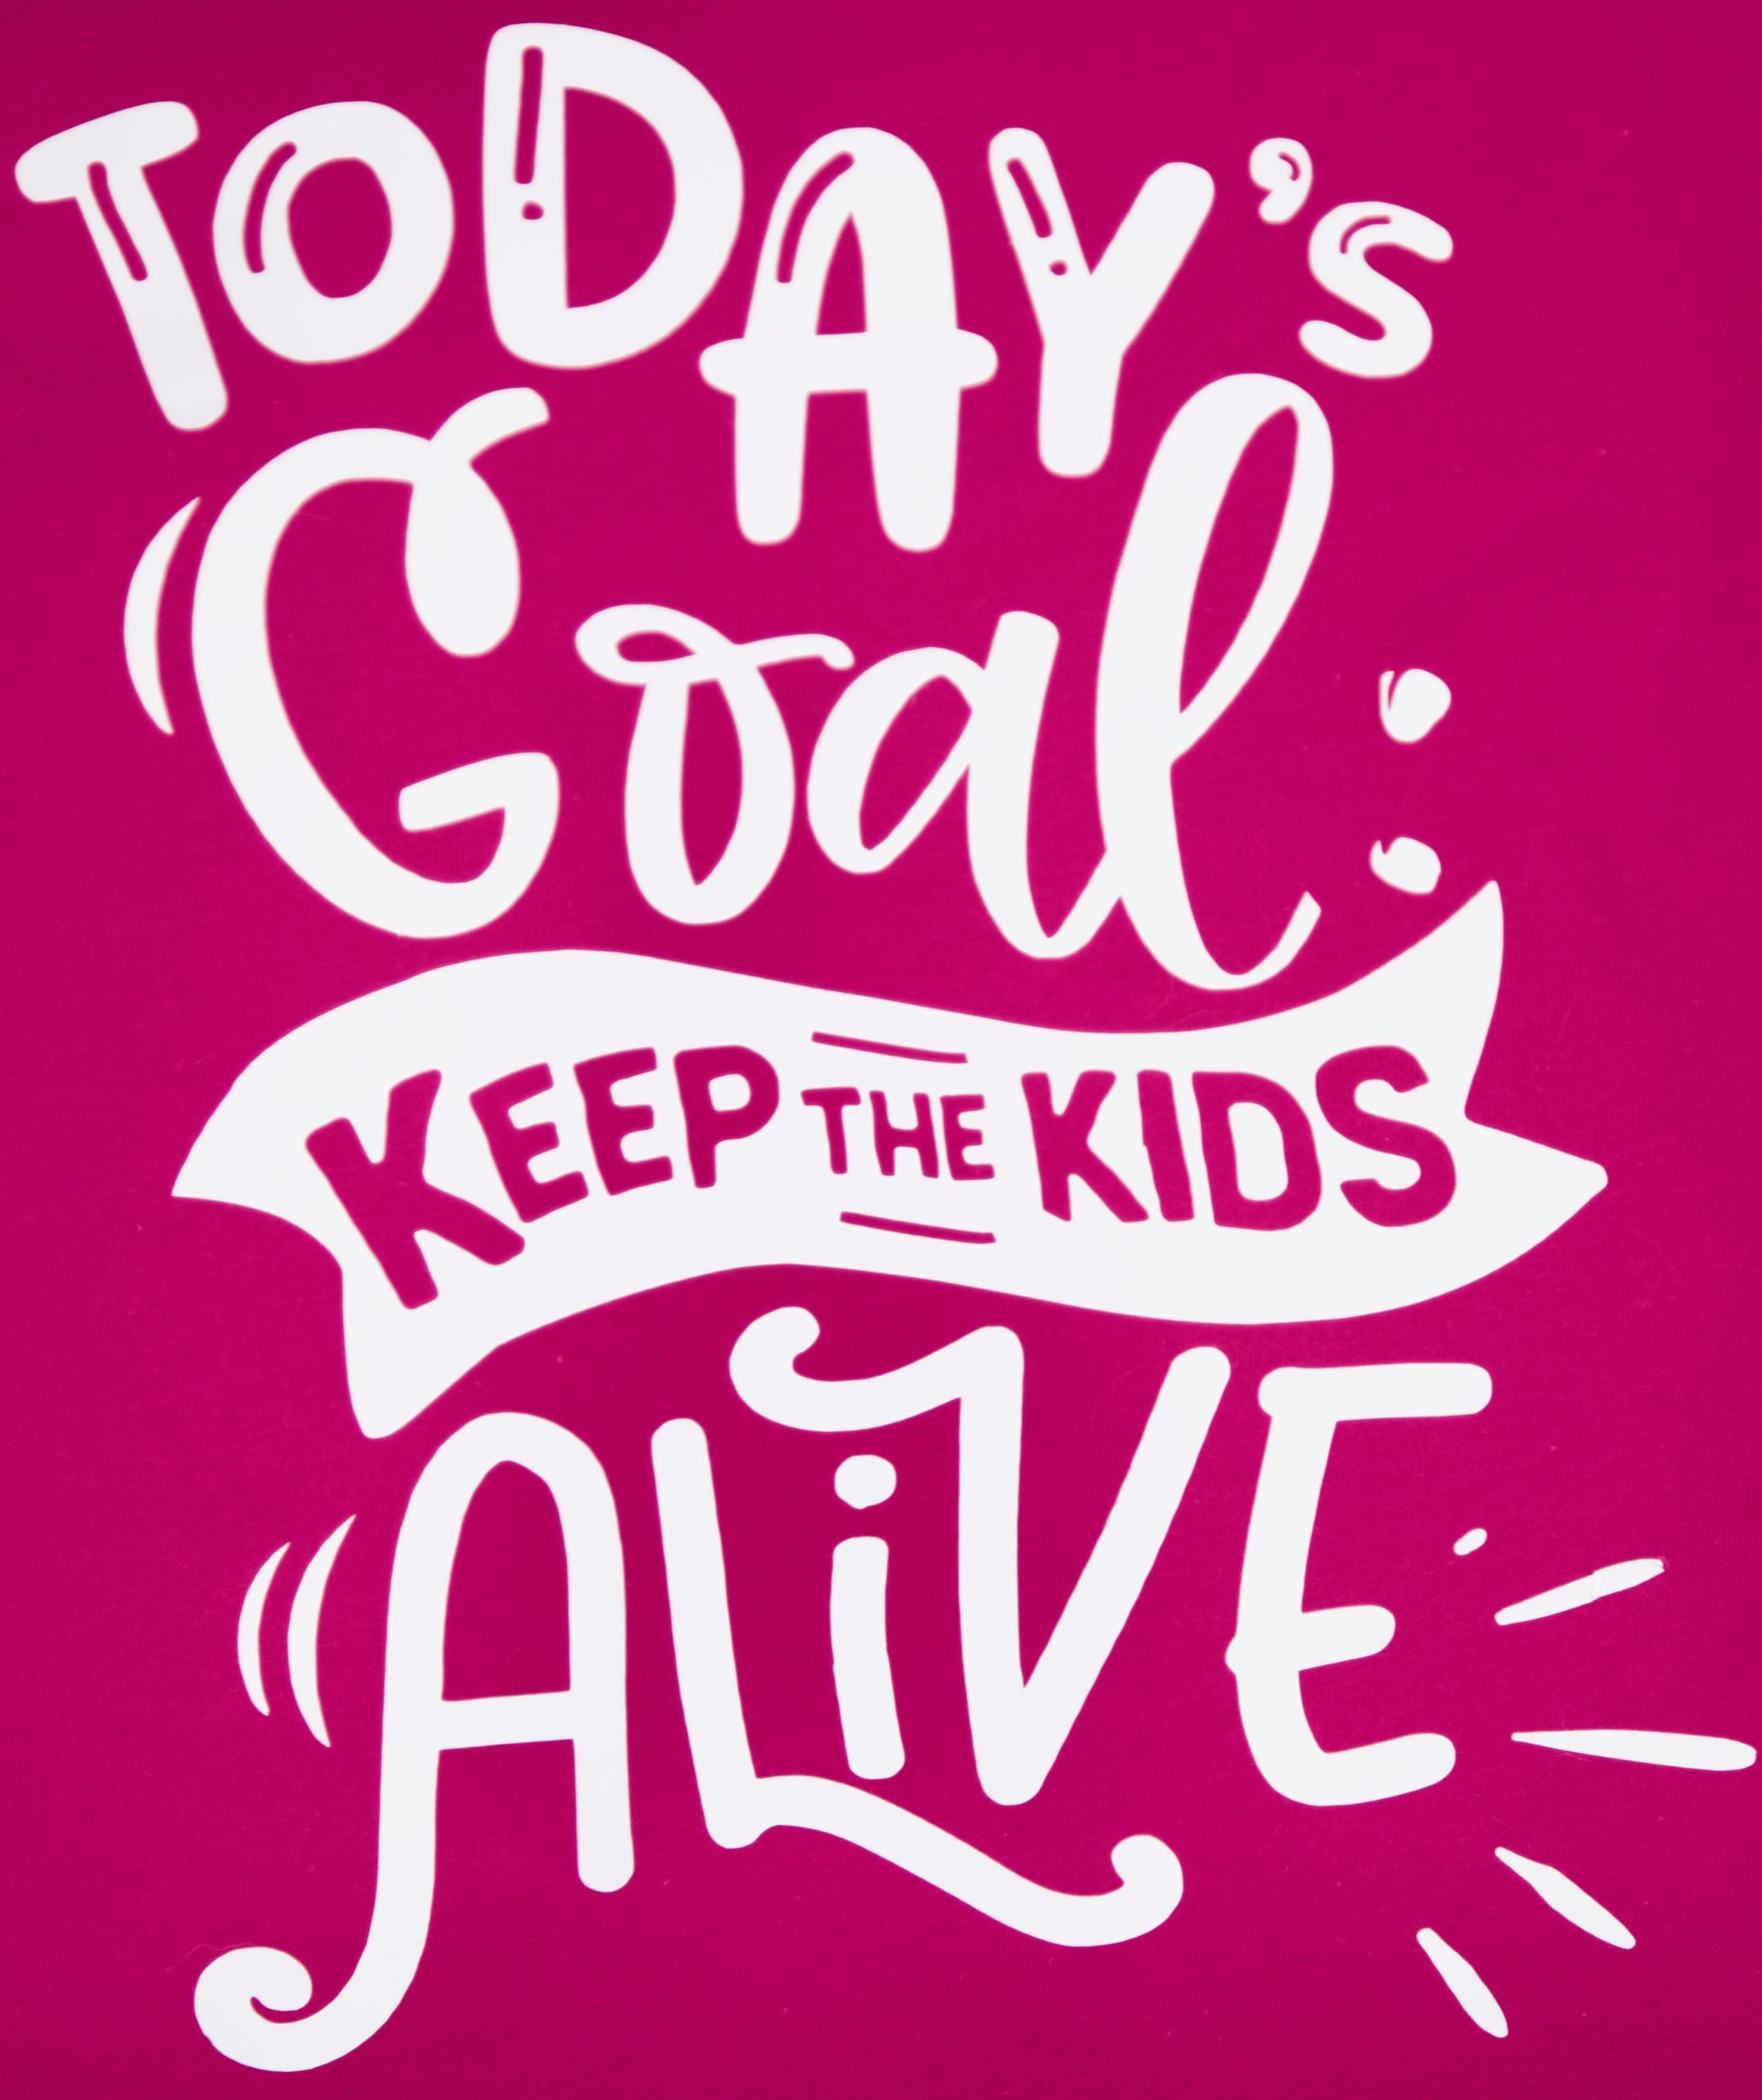 Today's Goal is to keep the kids alive T-Shirt